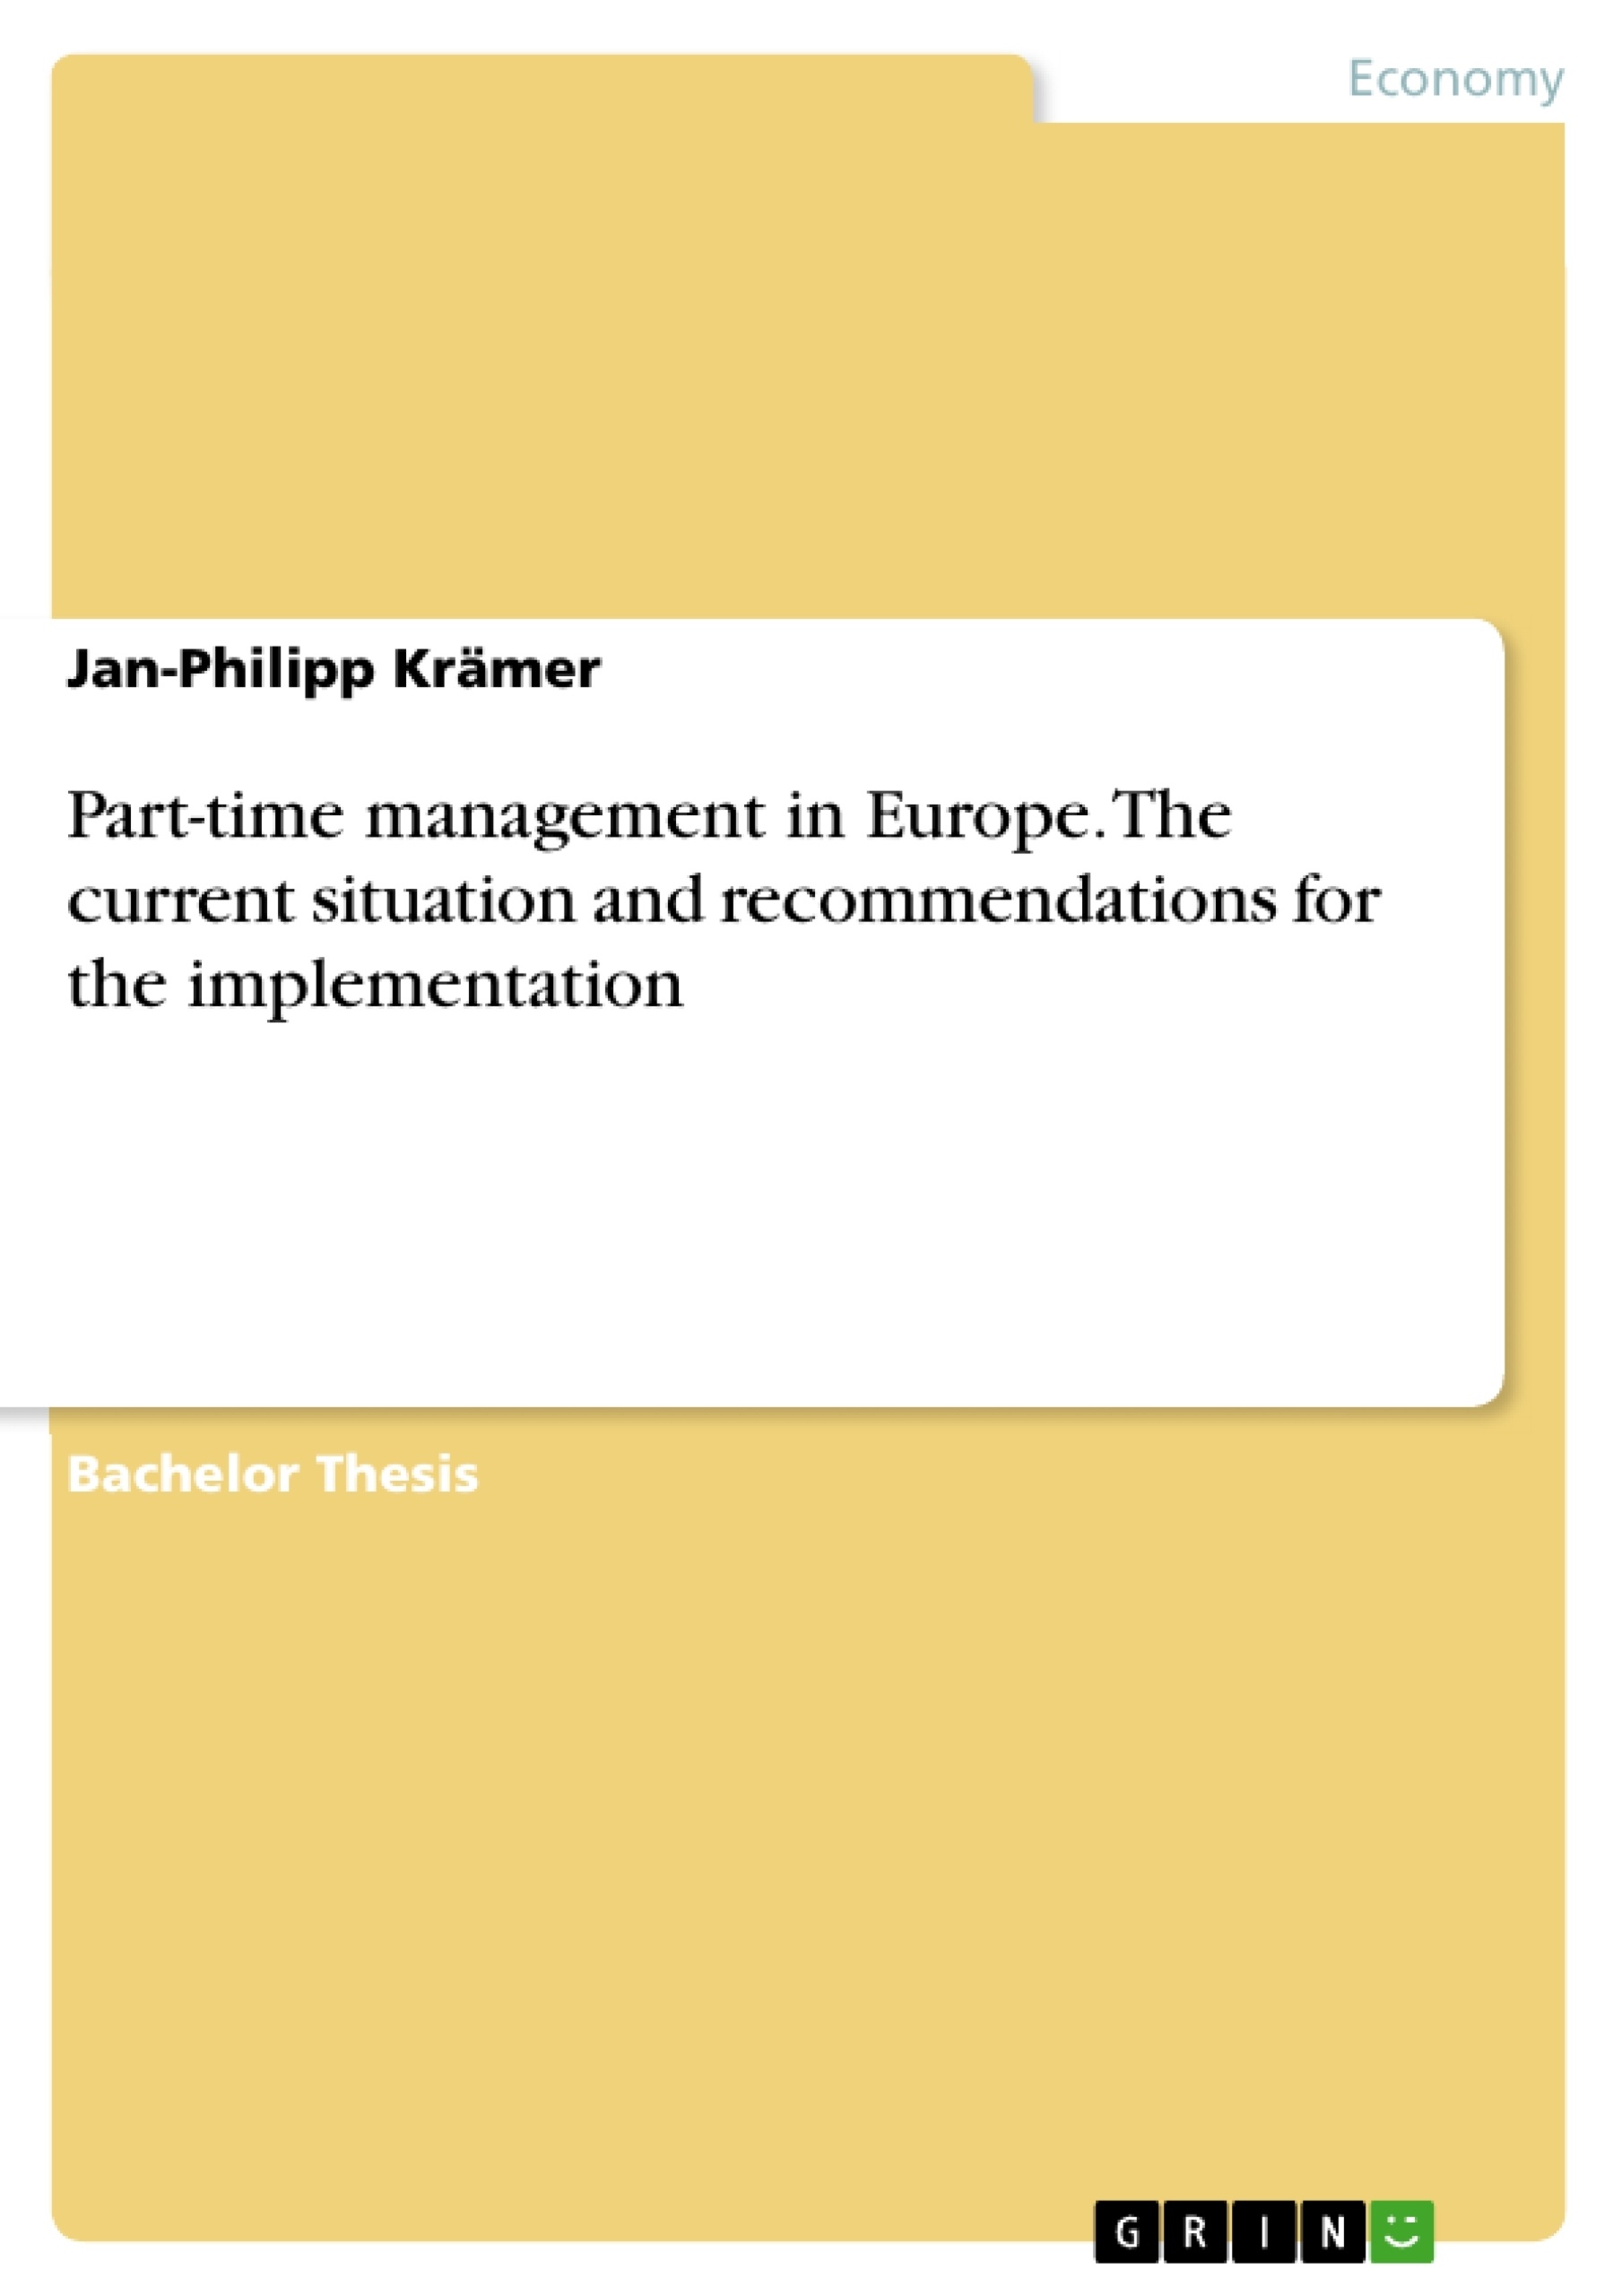 Título: Part-time management in Europe. The current situation and recommendations for the implementation